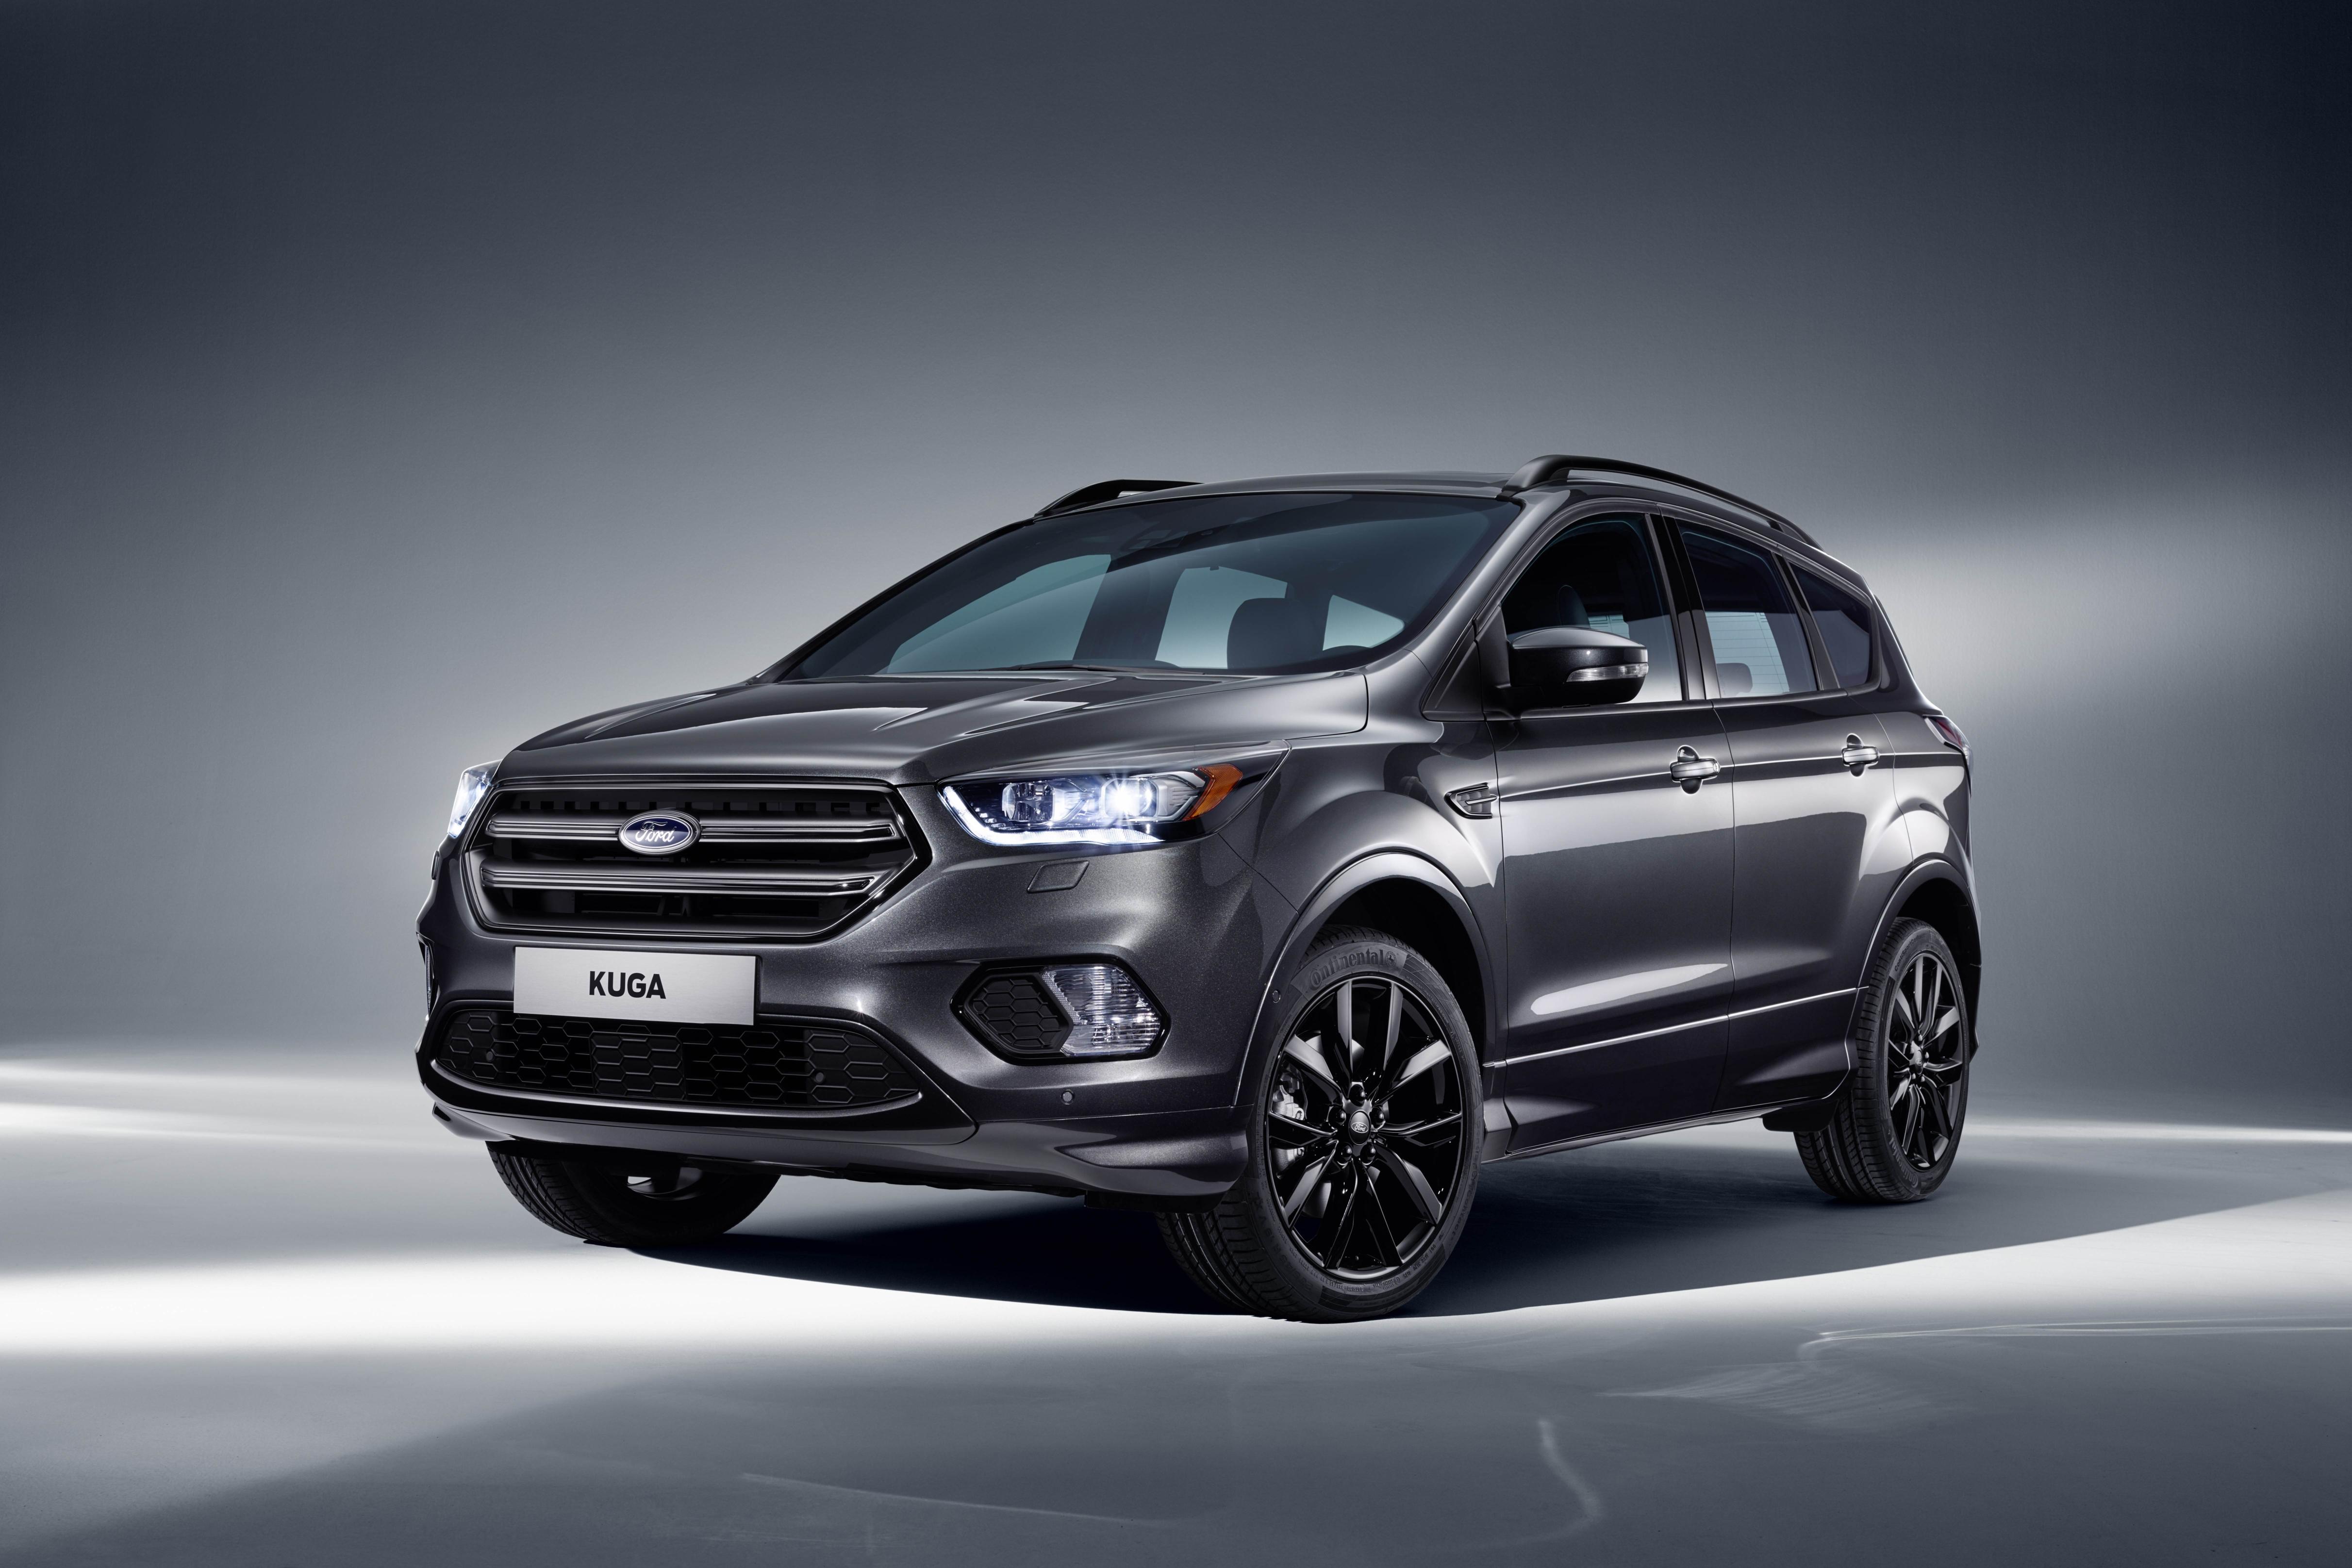 New Ford Kuga will be one of the stars at the 2016 Geneva motor show